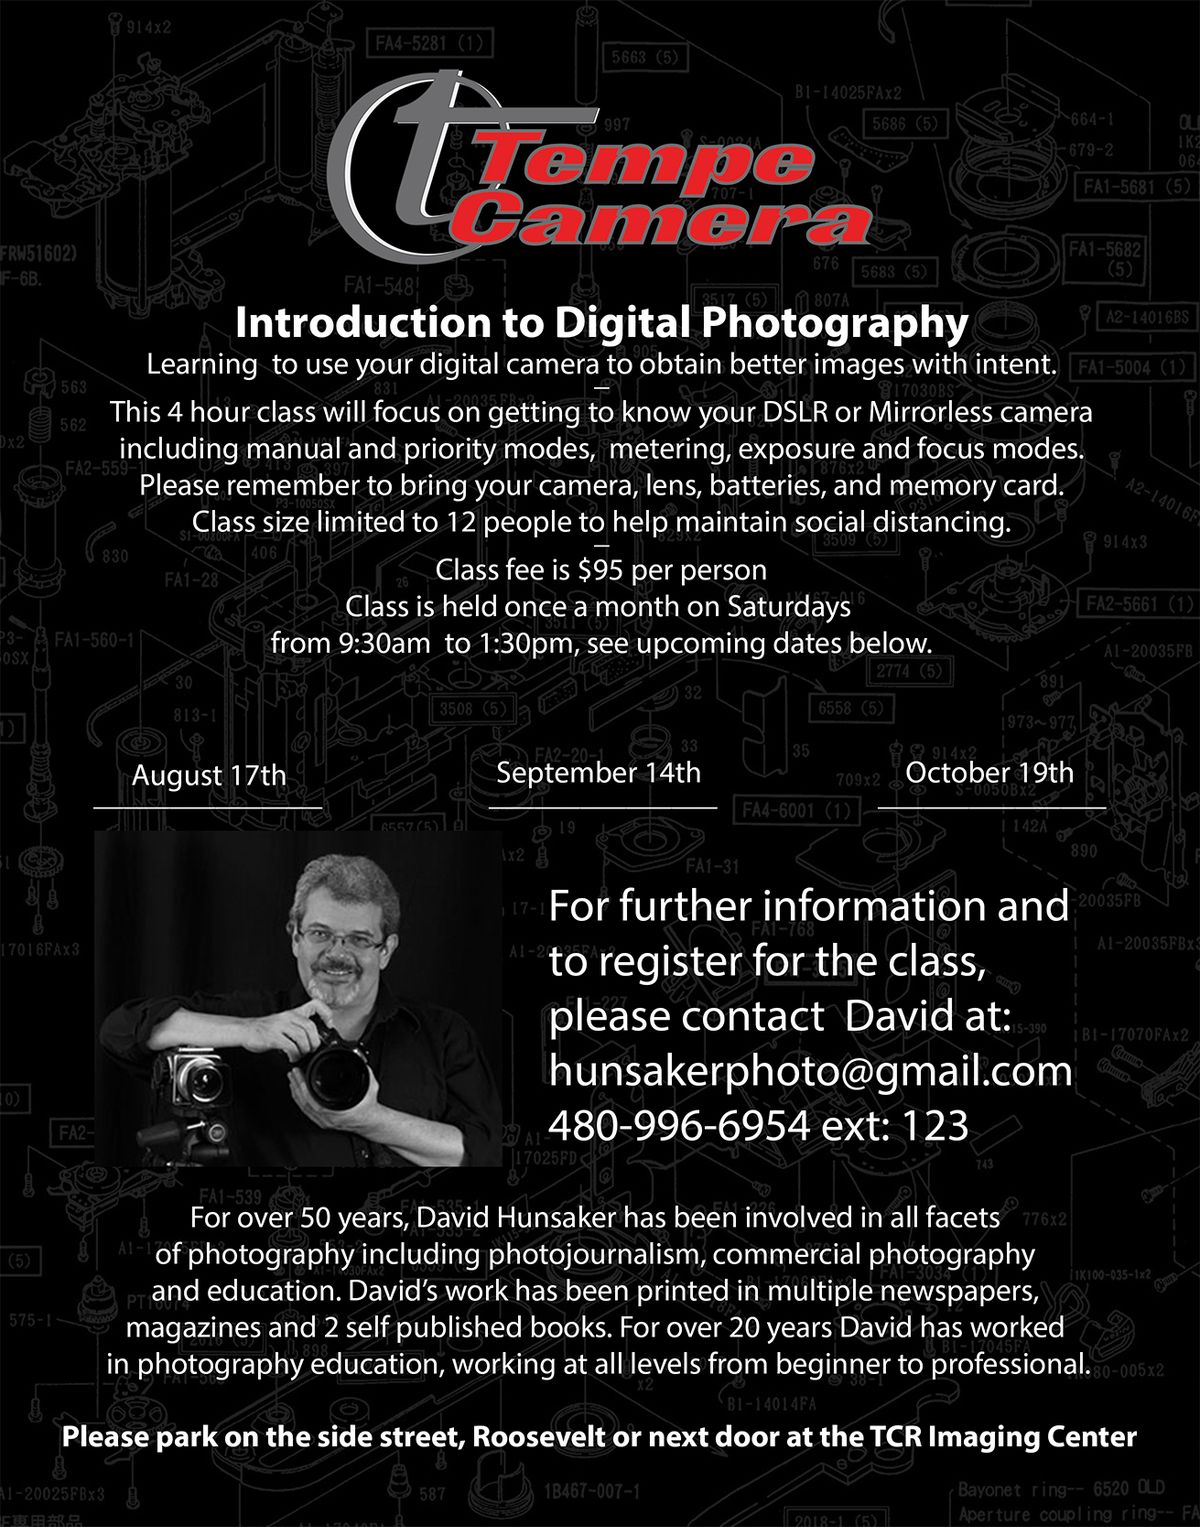 Introduction to Digital Photography Class